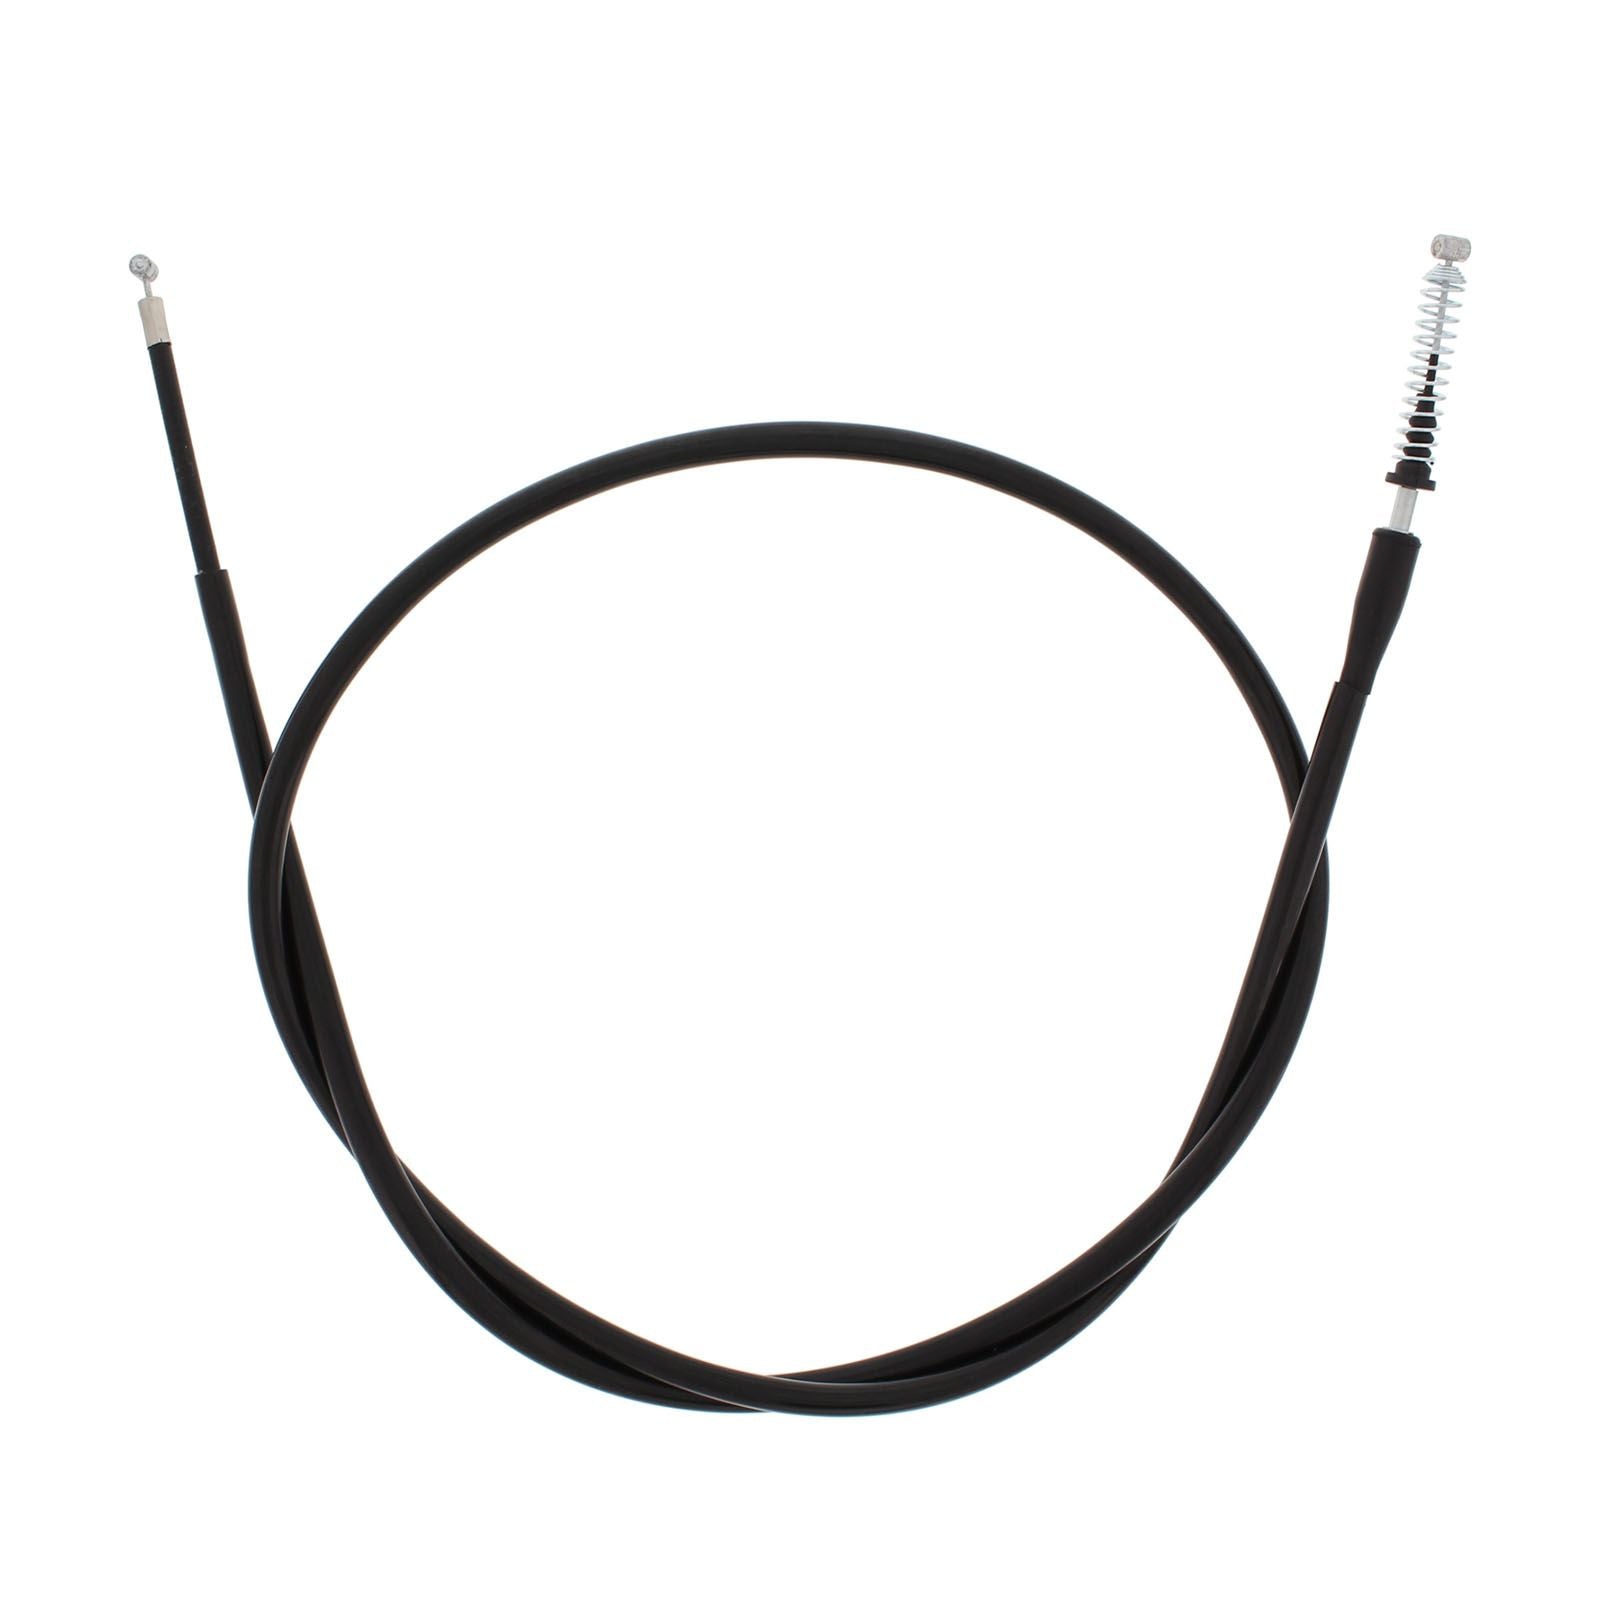 New ALL BALLS Racing Brake Cable - Rear #AB454013